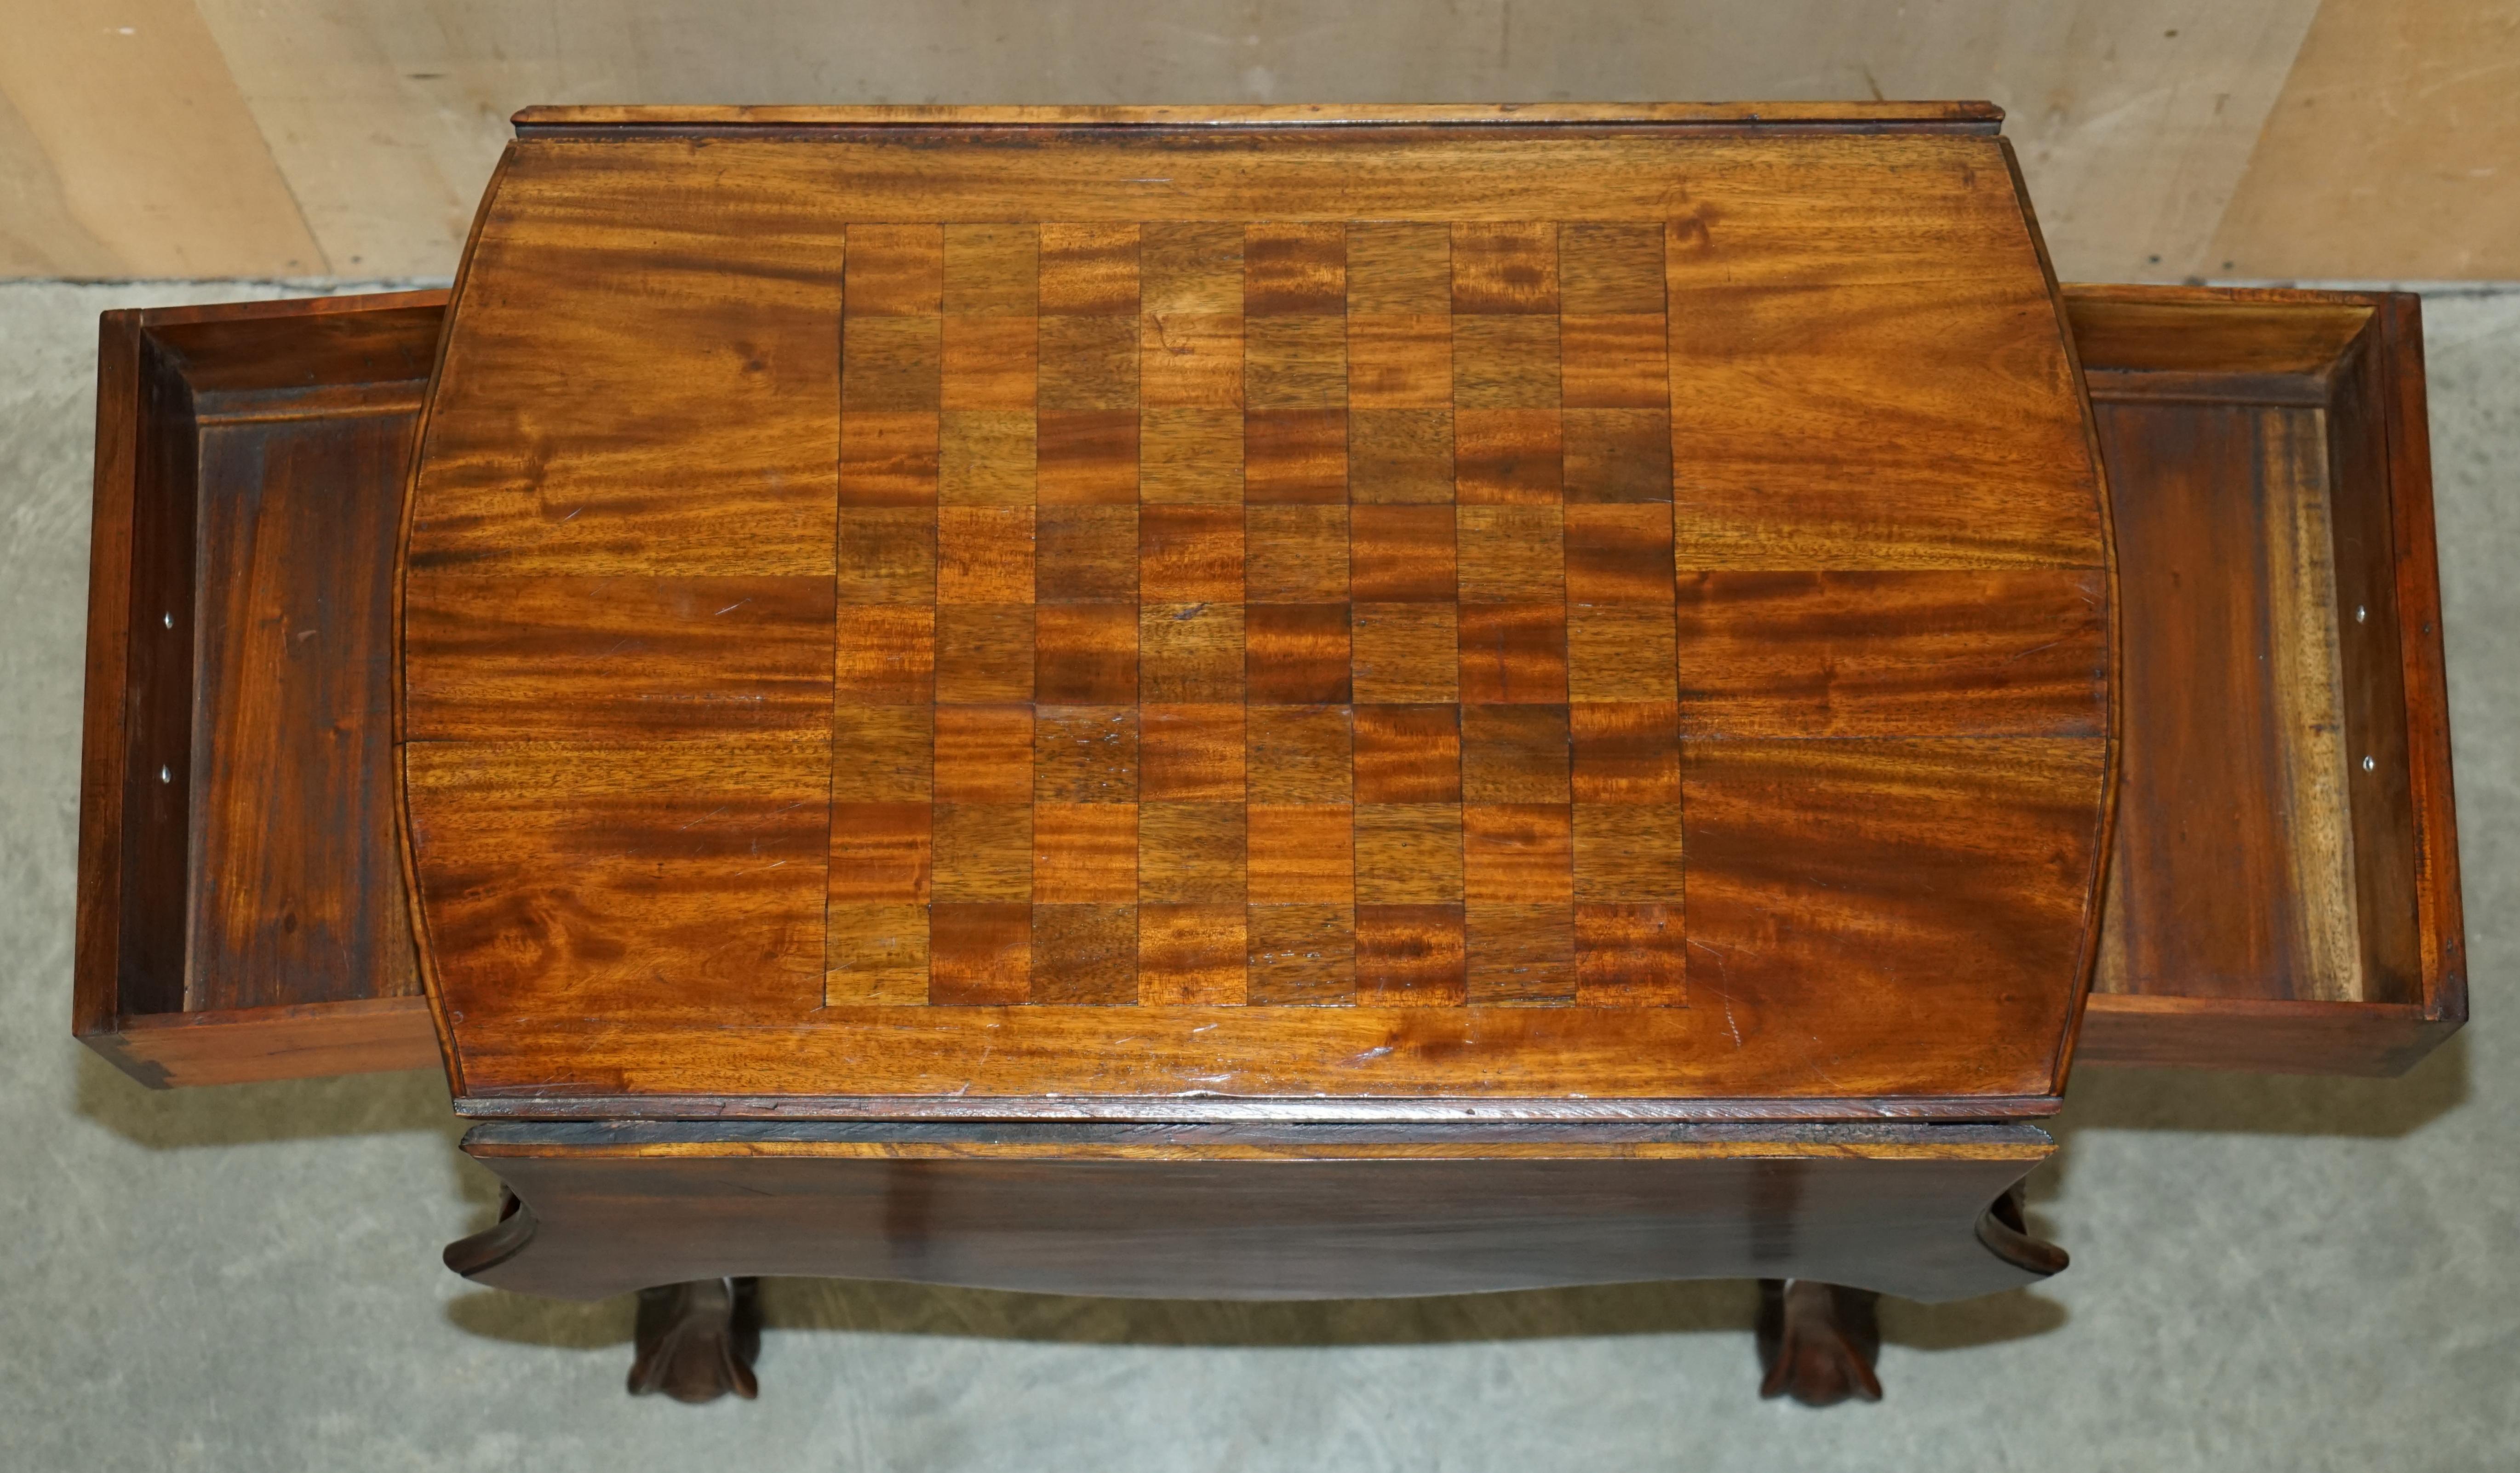 EXQUISITE THOMAS CHIPPENDALE STYLE CLAW & BALL FEET EXTENDiNG CHESS BOARD TABLE For Sale 10